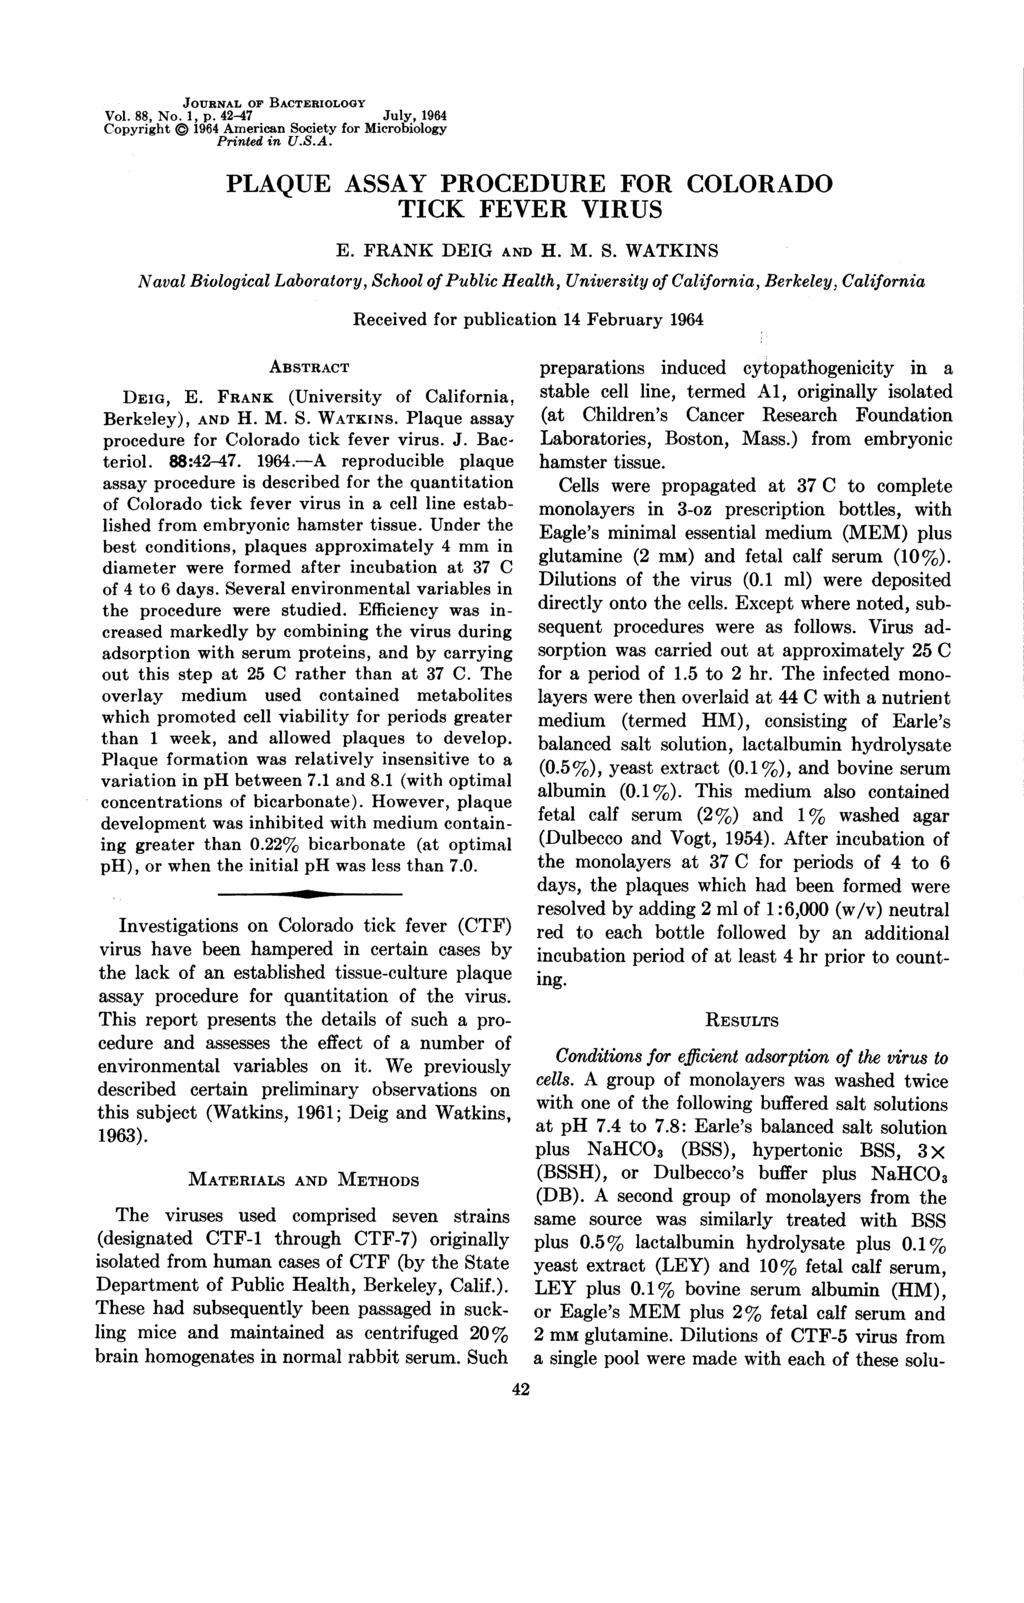 JOURNAL OF BATERIOLOGY Vol. 88, No. 1, p. 42-47 July, 1964 opyright a 1964 American So